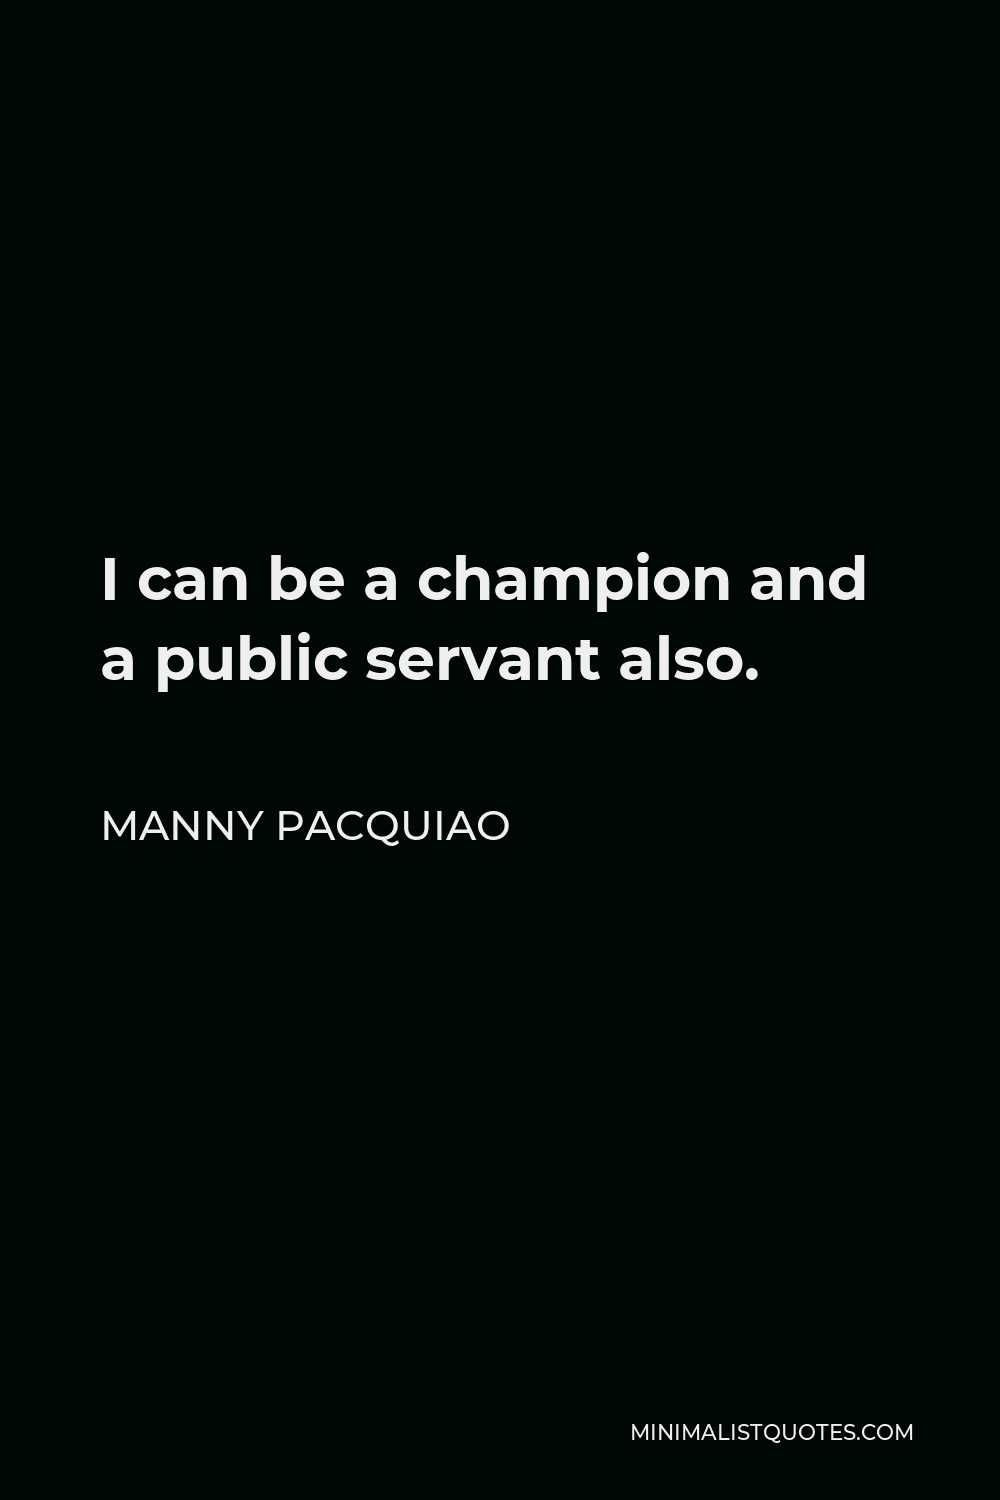 Manny Pacquiao Quote - I can be a champion and a public servant also.